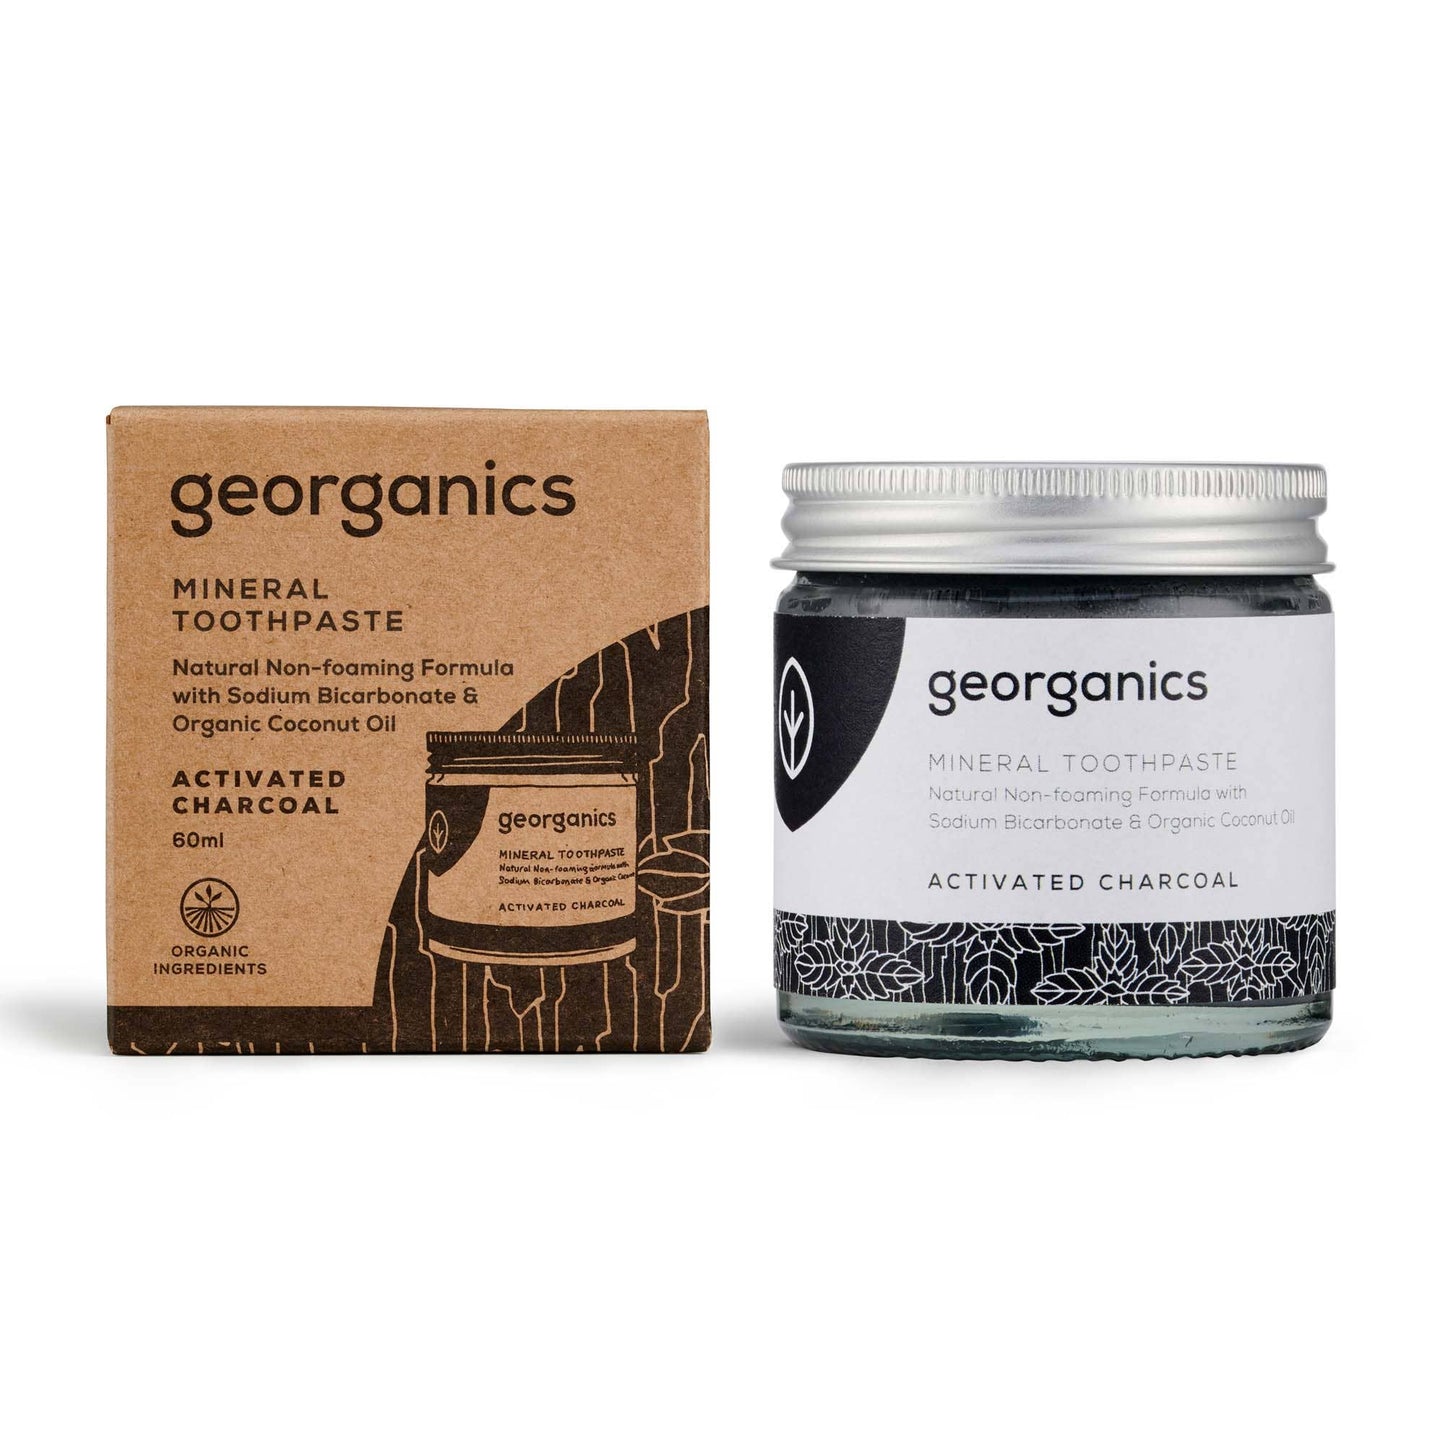 Mineral Toothpaste - Activated Charcoal